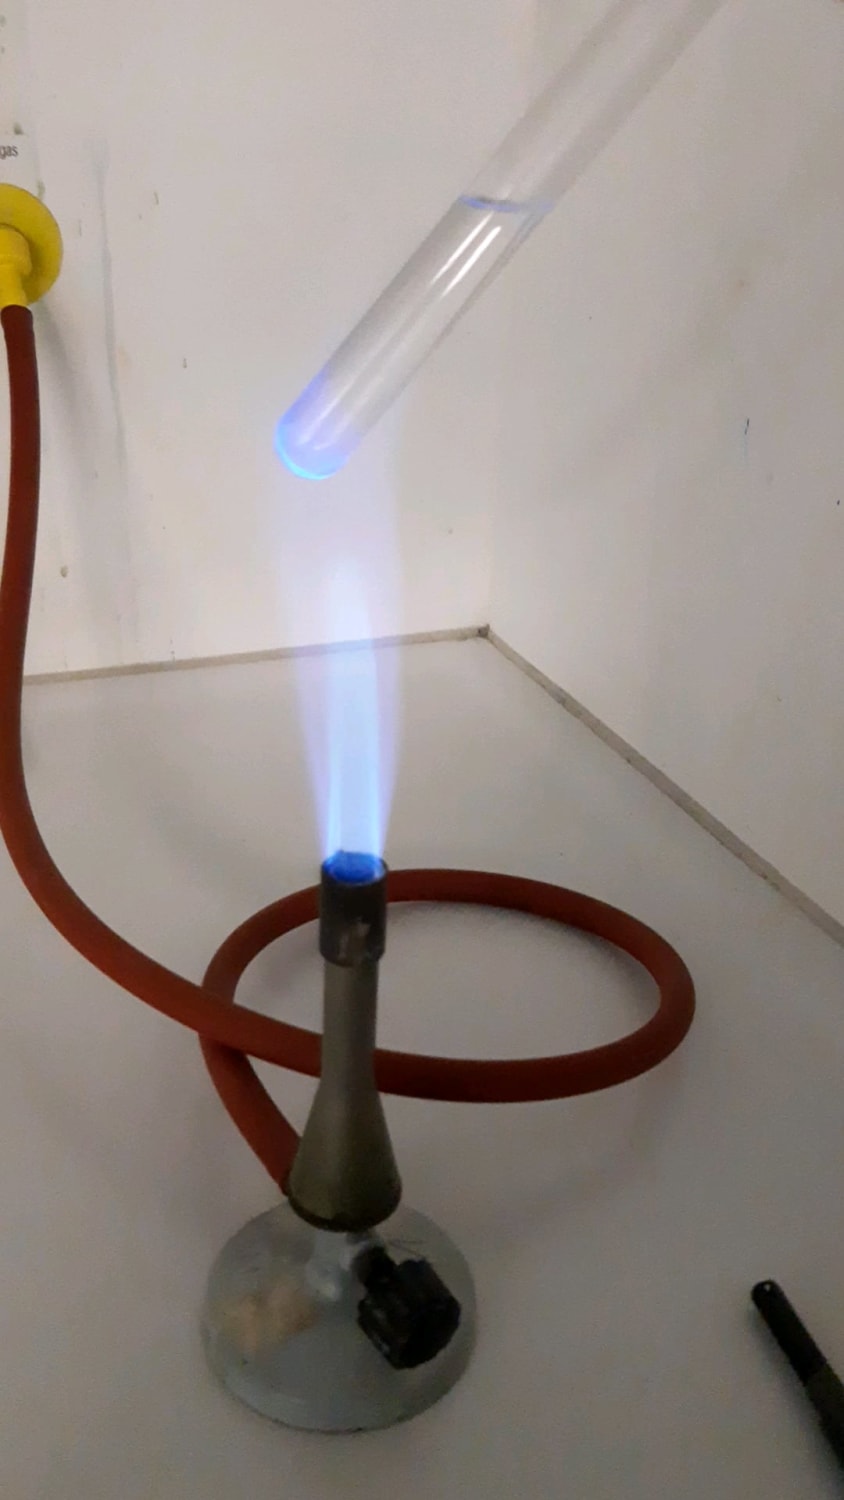 Proof of Sn ions by blue luminescence on the outside of the test tube.